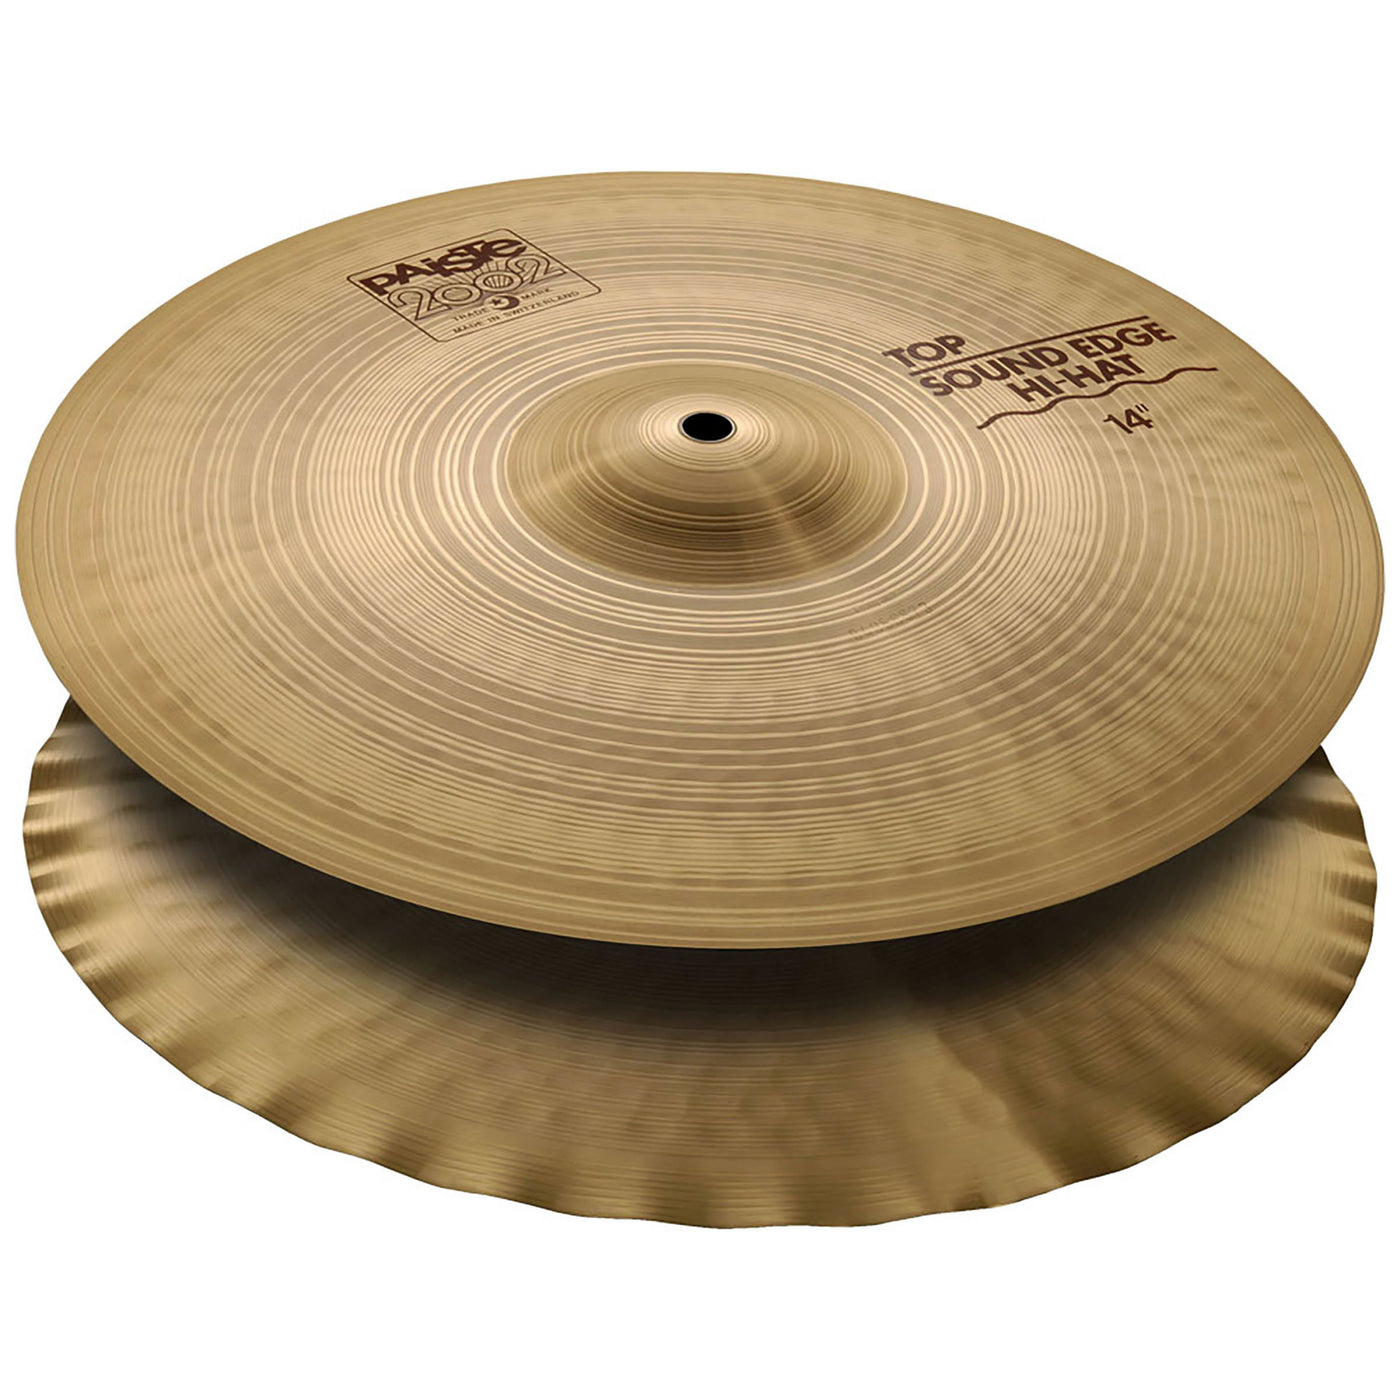 Paiste 1063114 Sound Edge Hi-Hat Cymbals, 2002 Series, Percussion Instrument for Drums, 14"